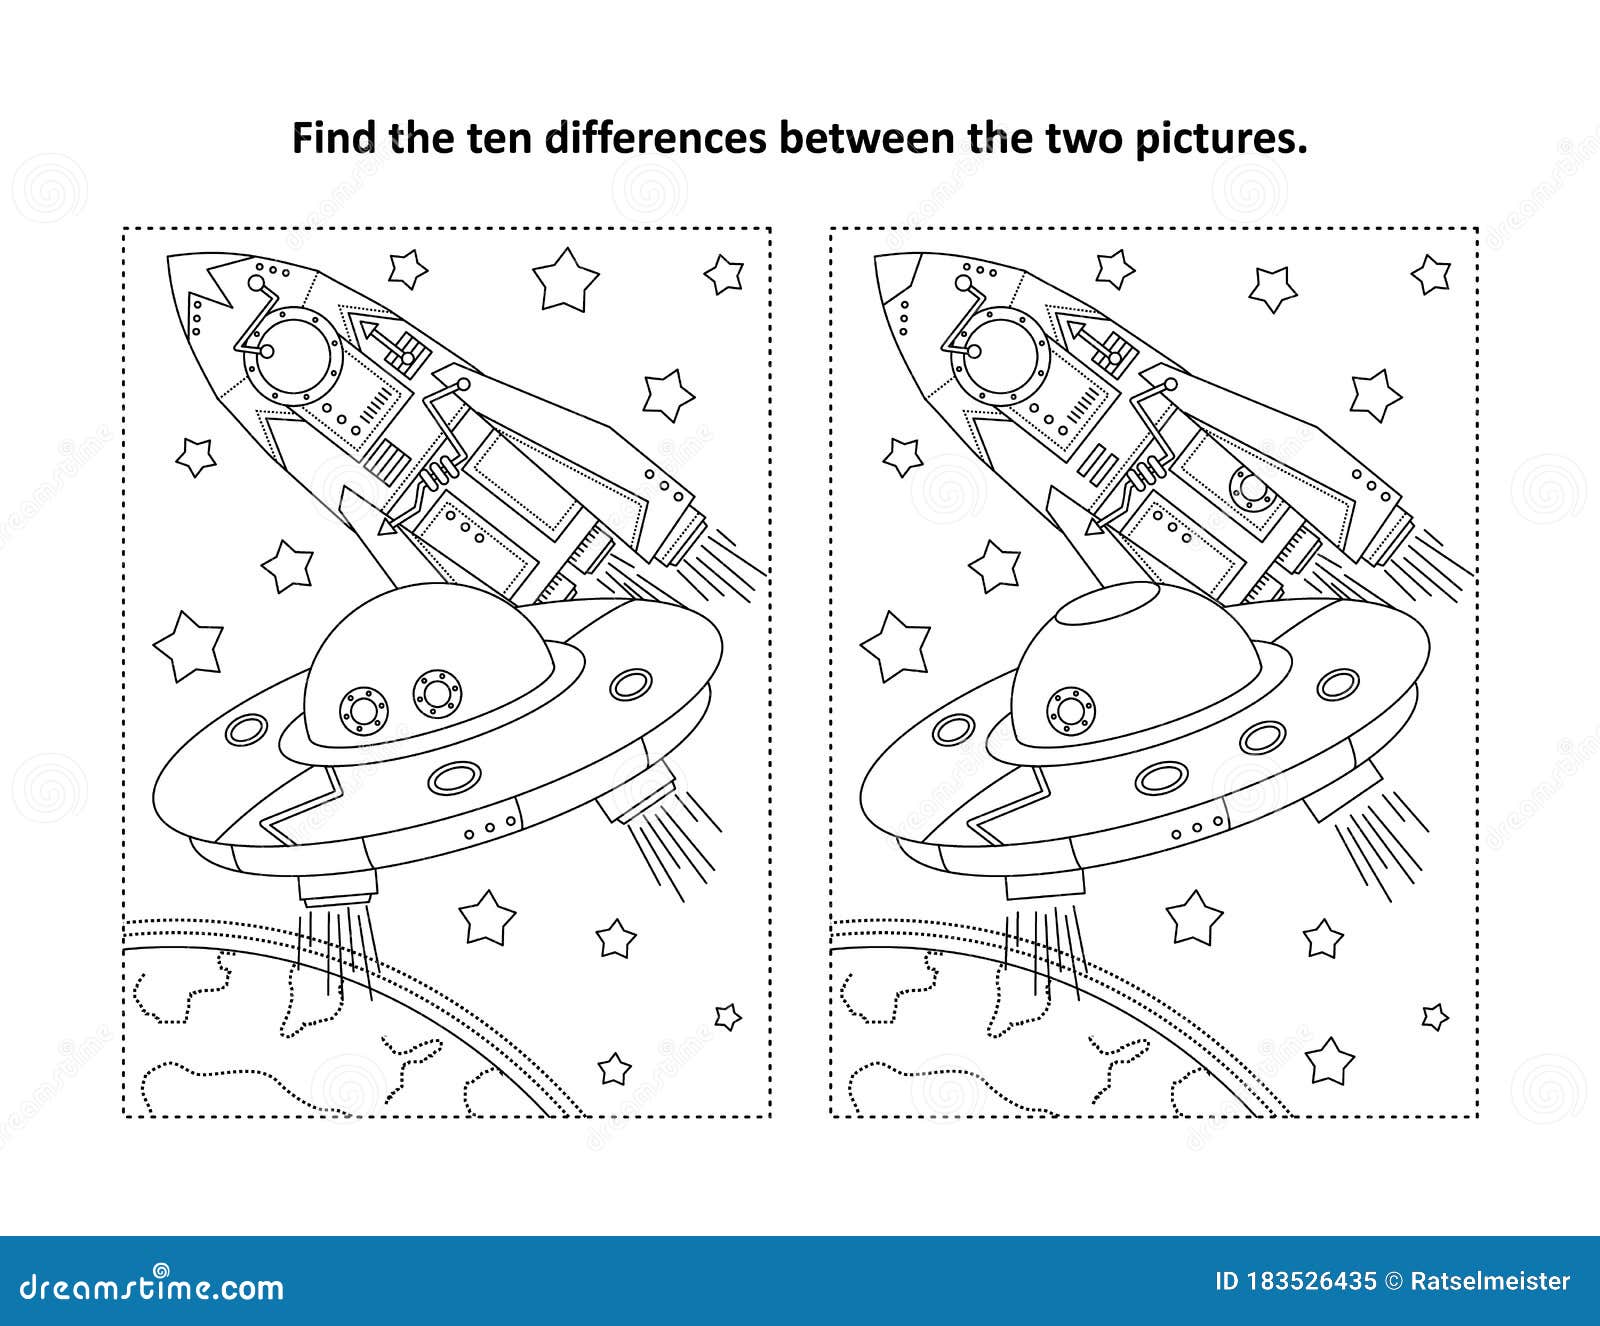 Find the differences visual puzzle and coloring page with ufo earth spaceship stock vector